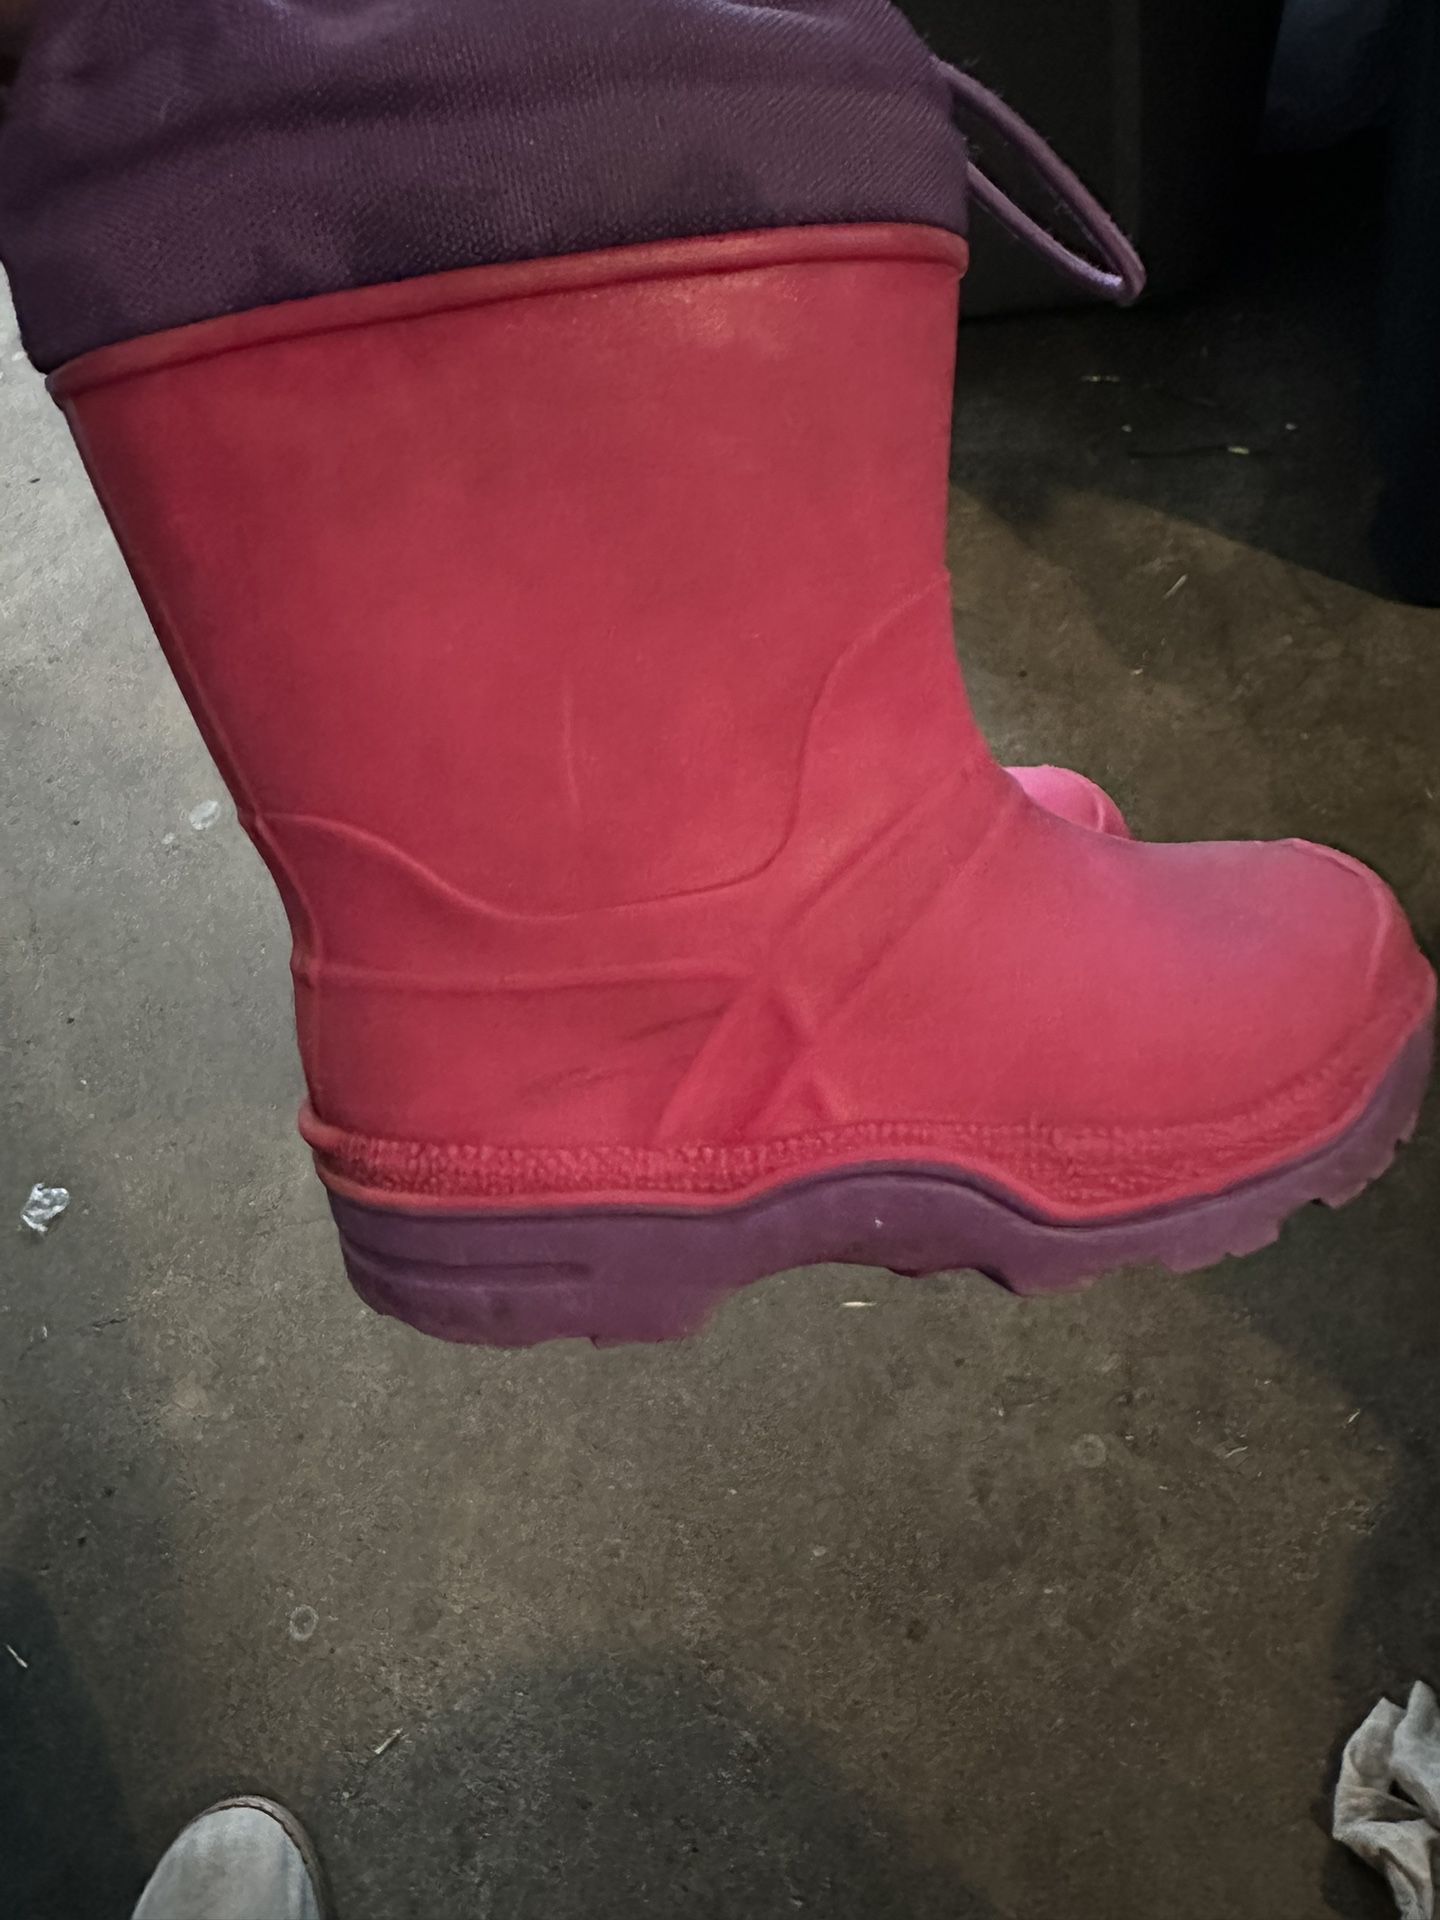 Pink And Purple Rain Boots Size 6